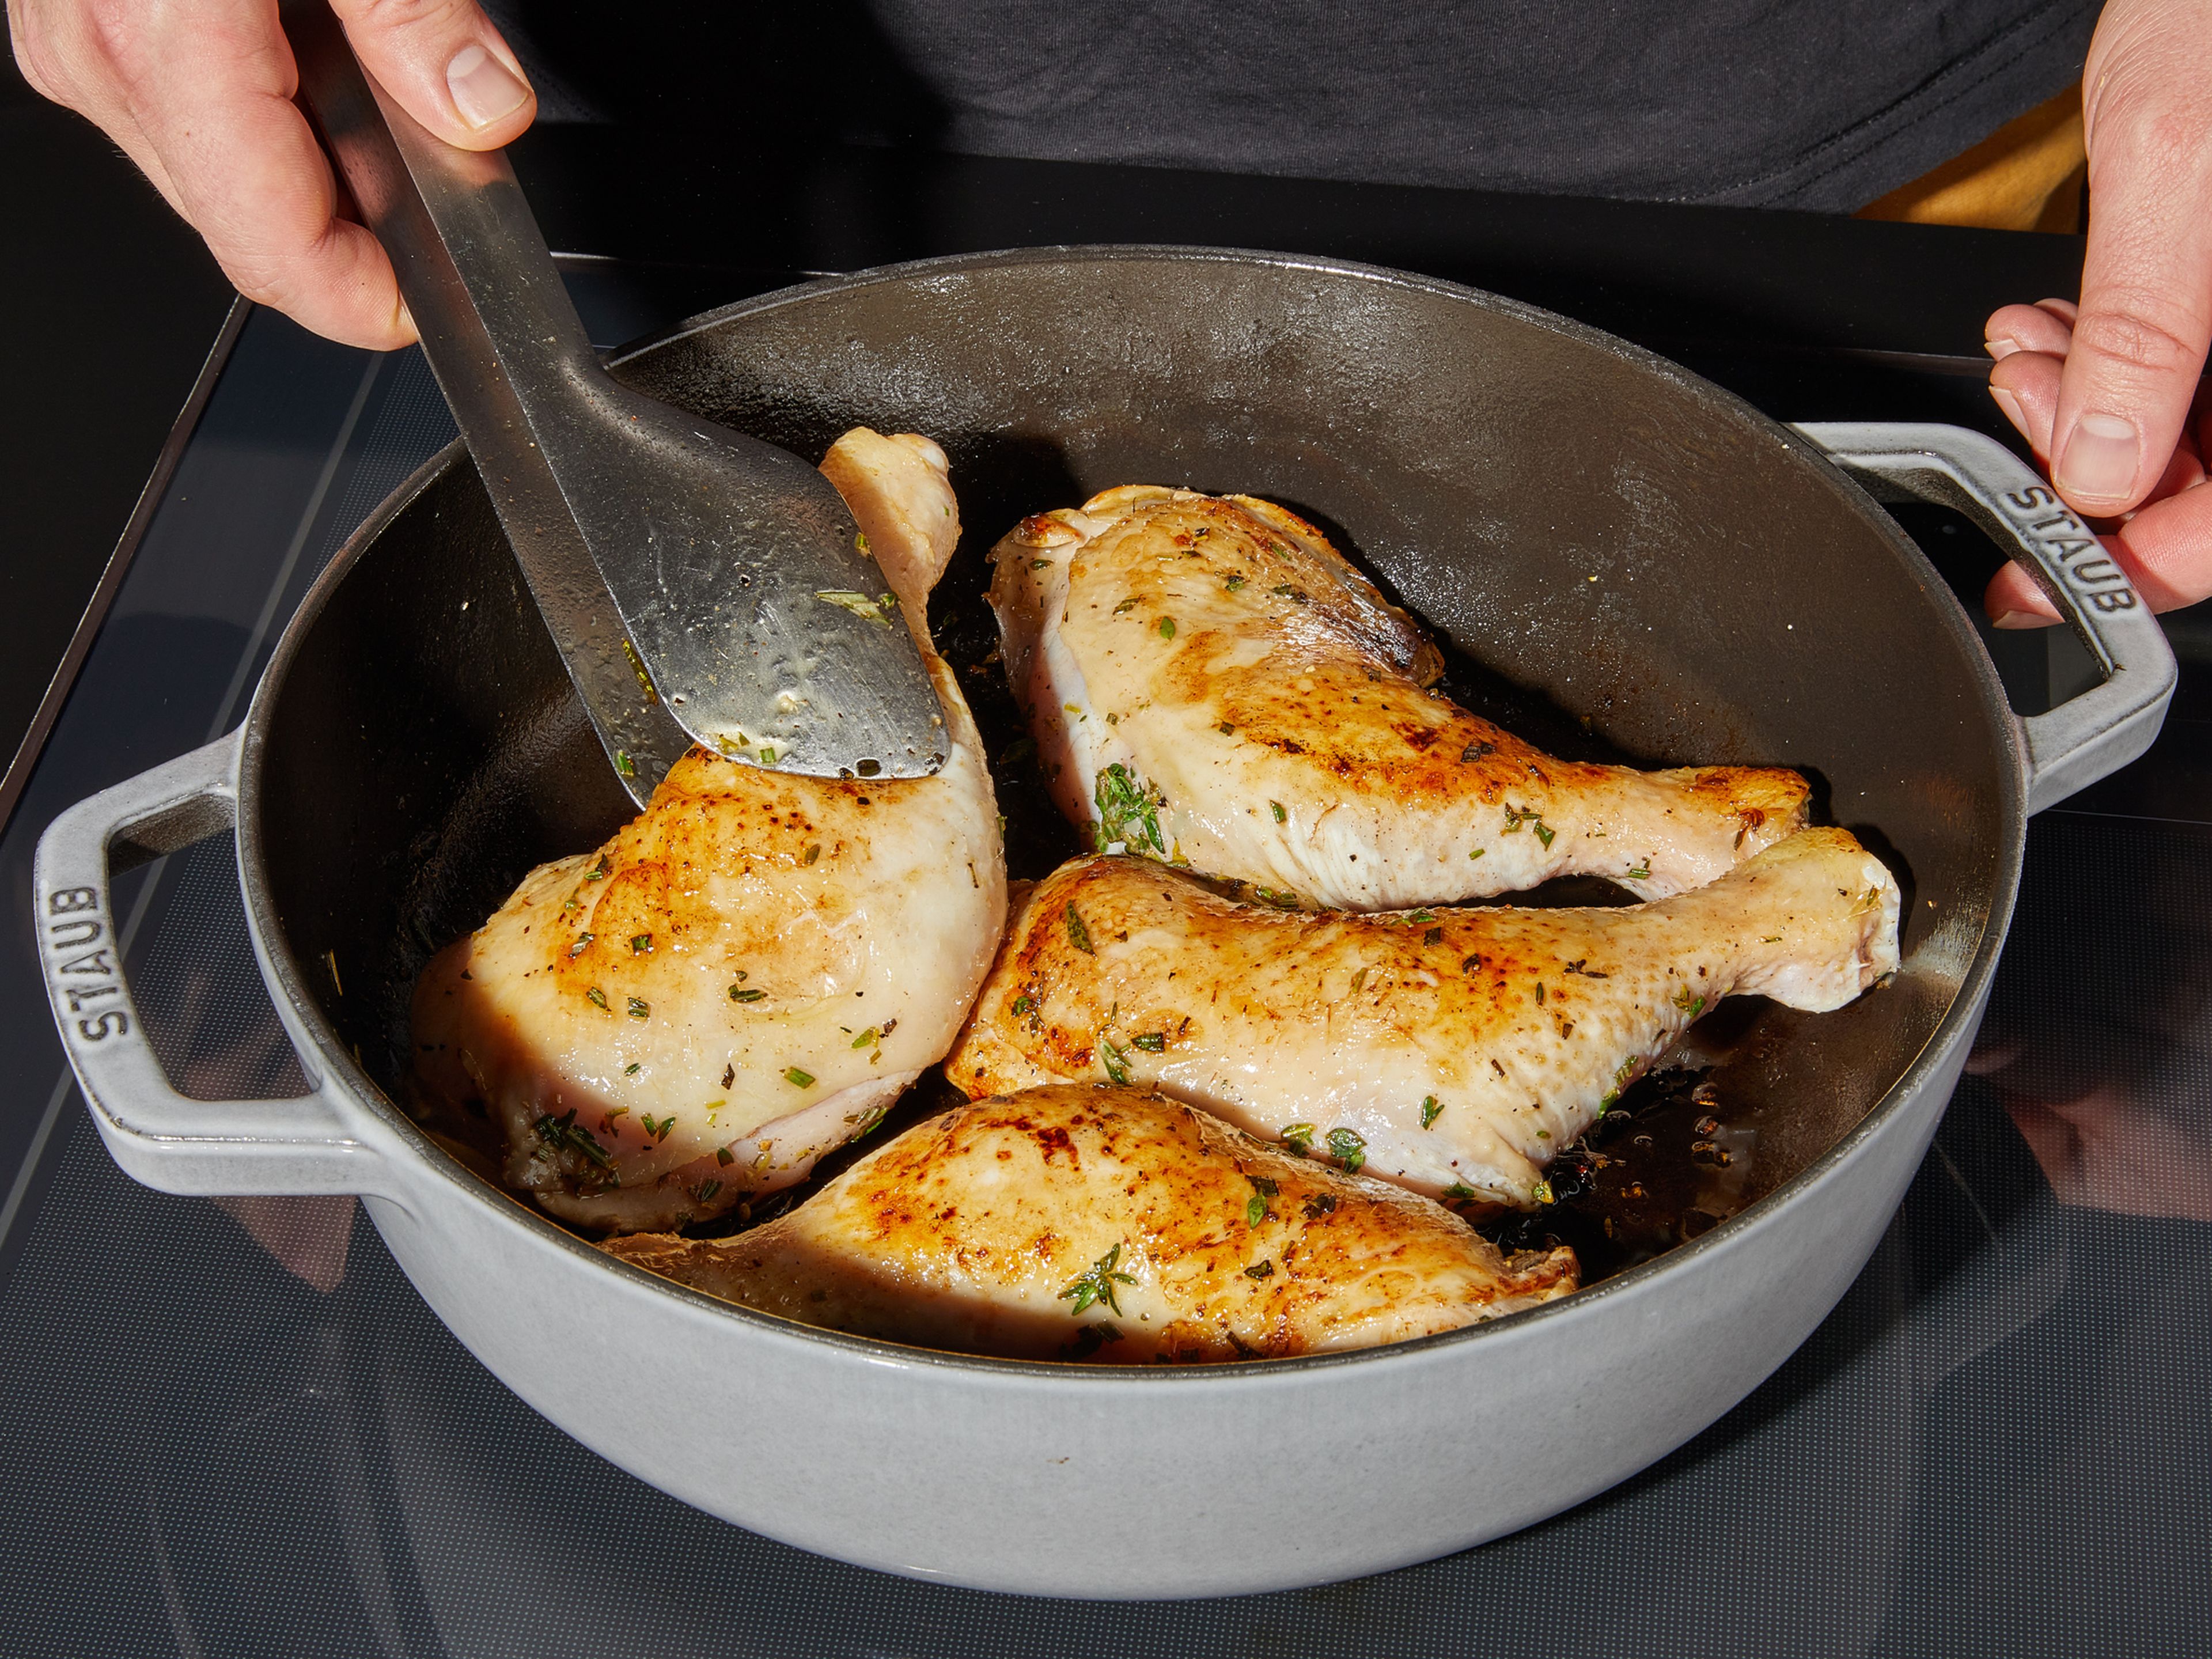 Preheat the oven to 180°C/350°F. In an ovenproof pan, sear chicken legs on both sides until golden brown then remove and set aside.